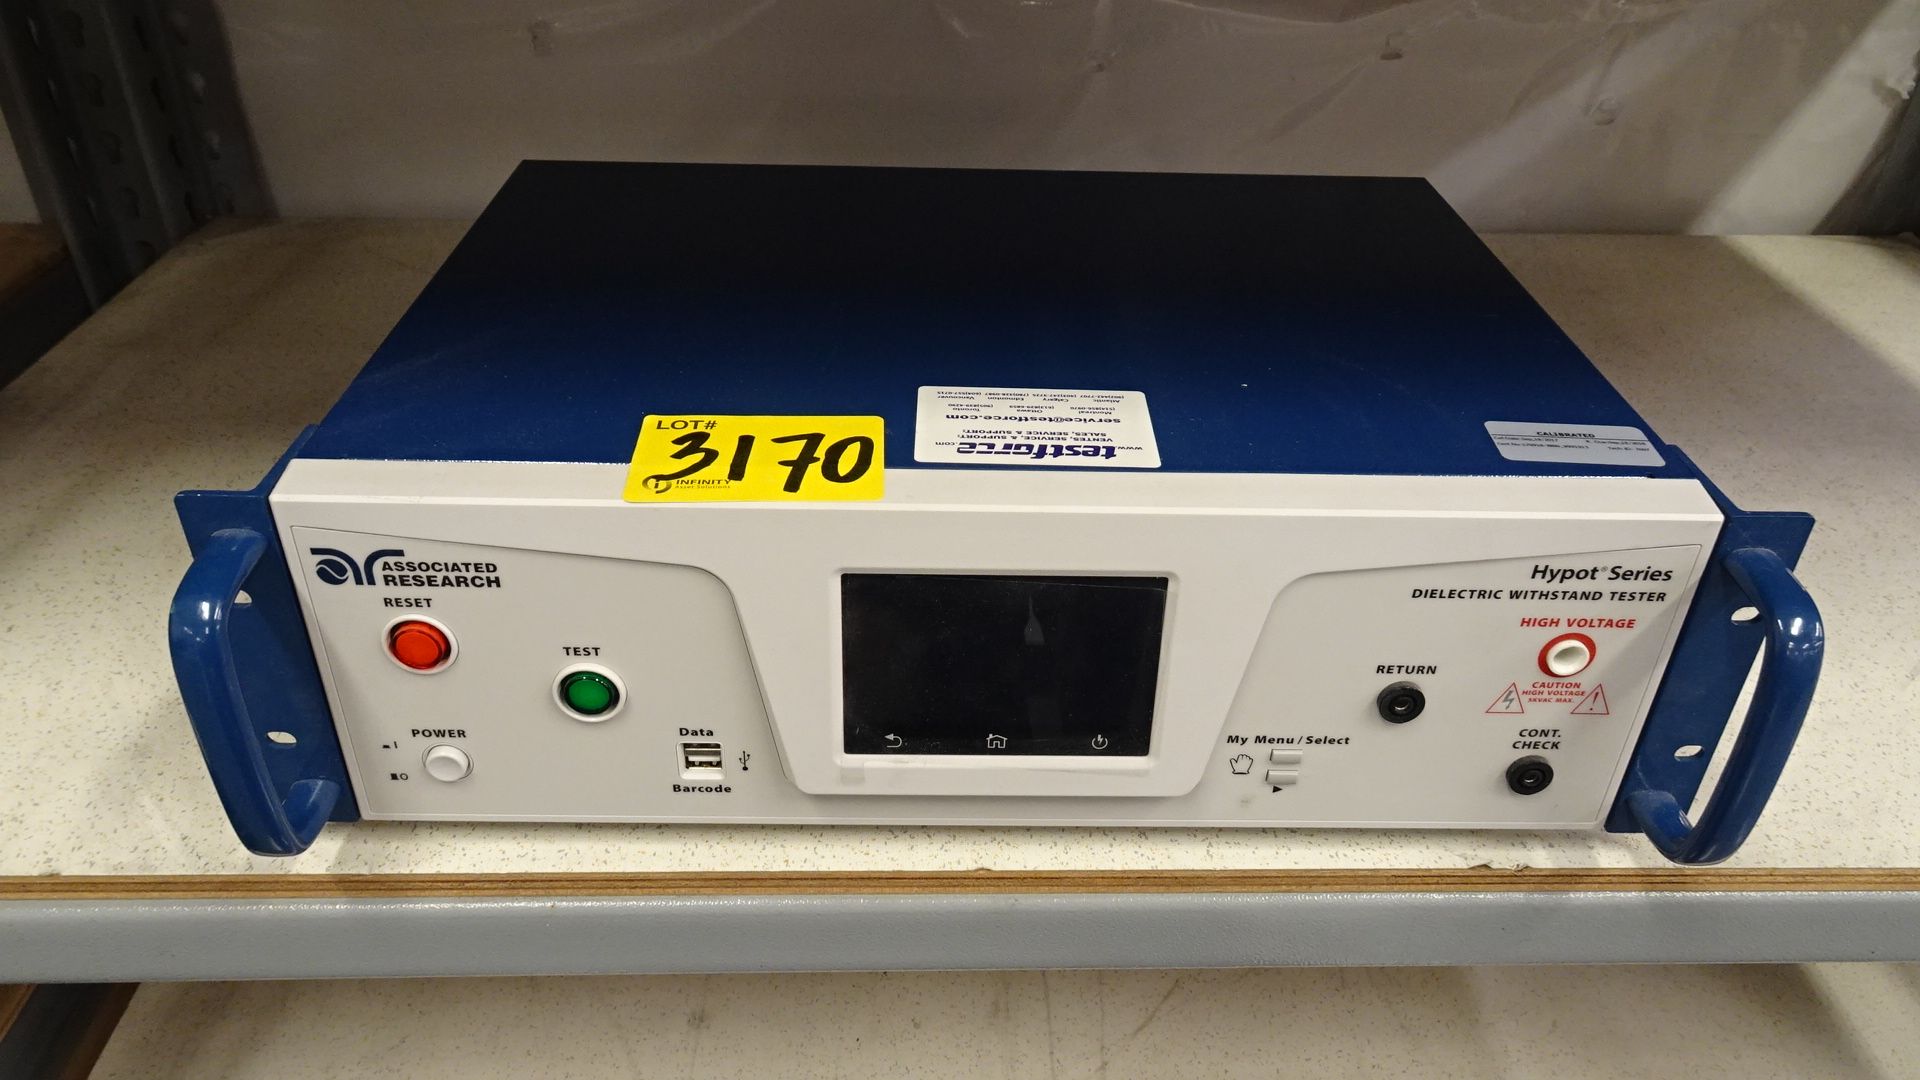 ASSOCIATED RESEARCH HYPOT SERIES DIELECTRIC WITHSTAND TESTER (REUTER)